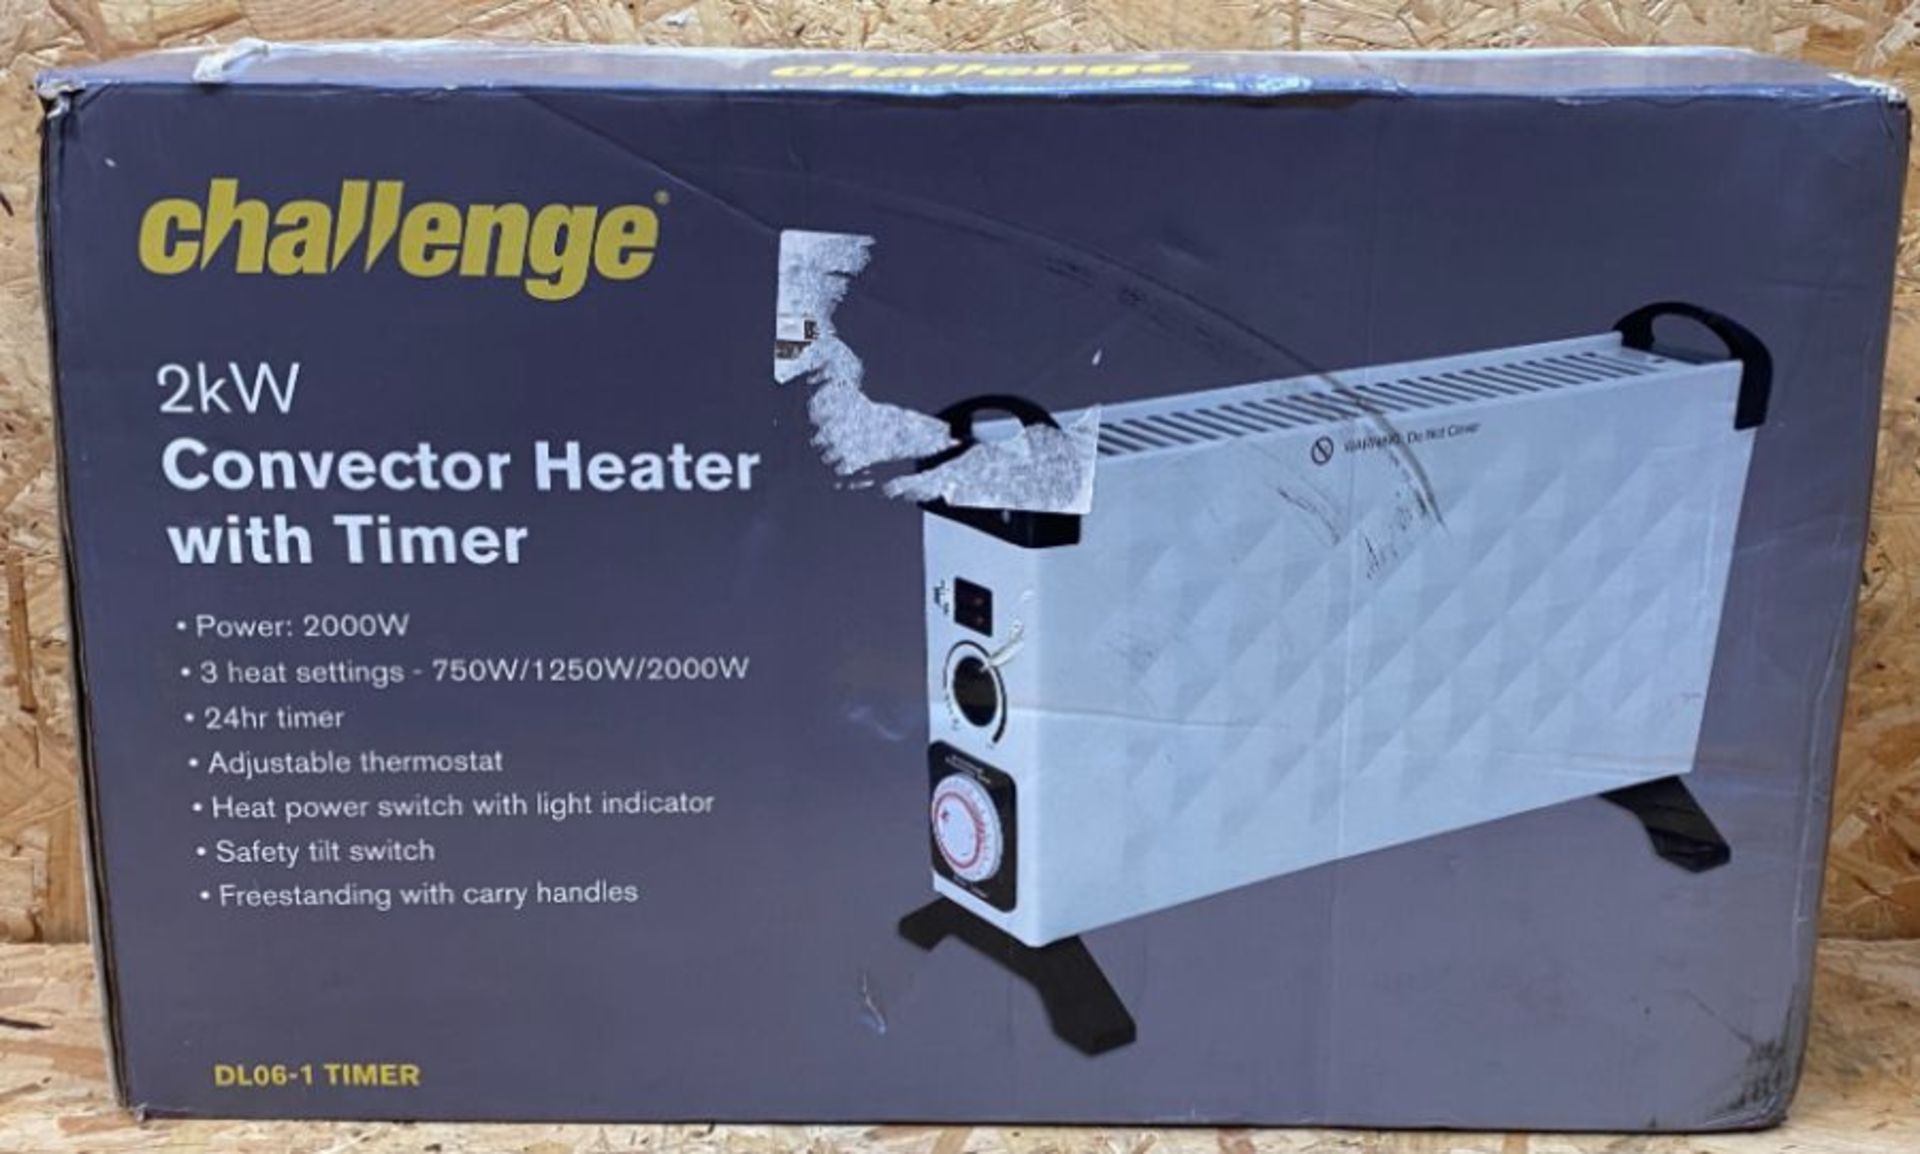 1 X CHALLENGE 2KW CONVECTOR HEATER WITH TIMER / RRP £36.27 - UNTESTED CUSTOMER RETURNS -